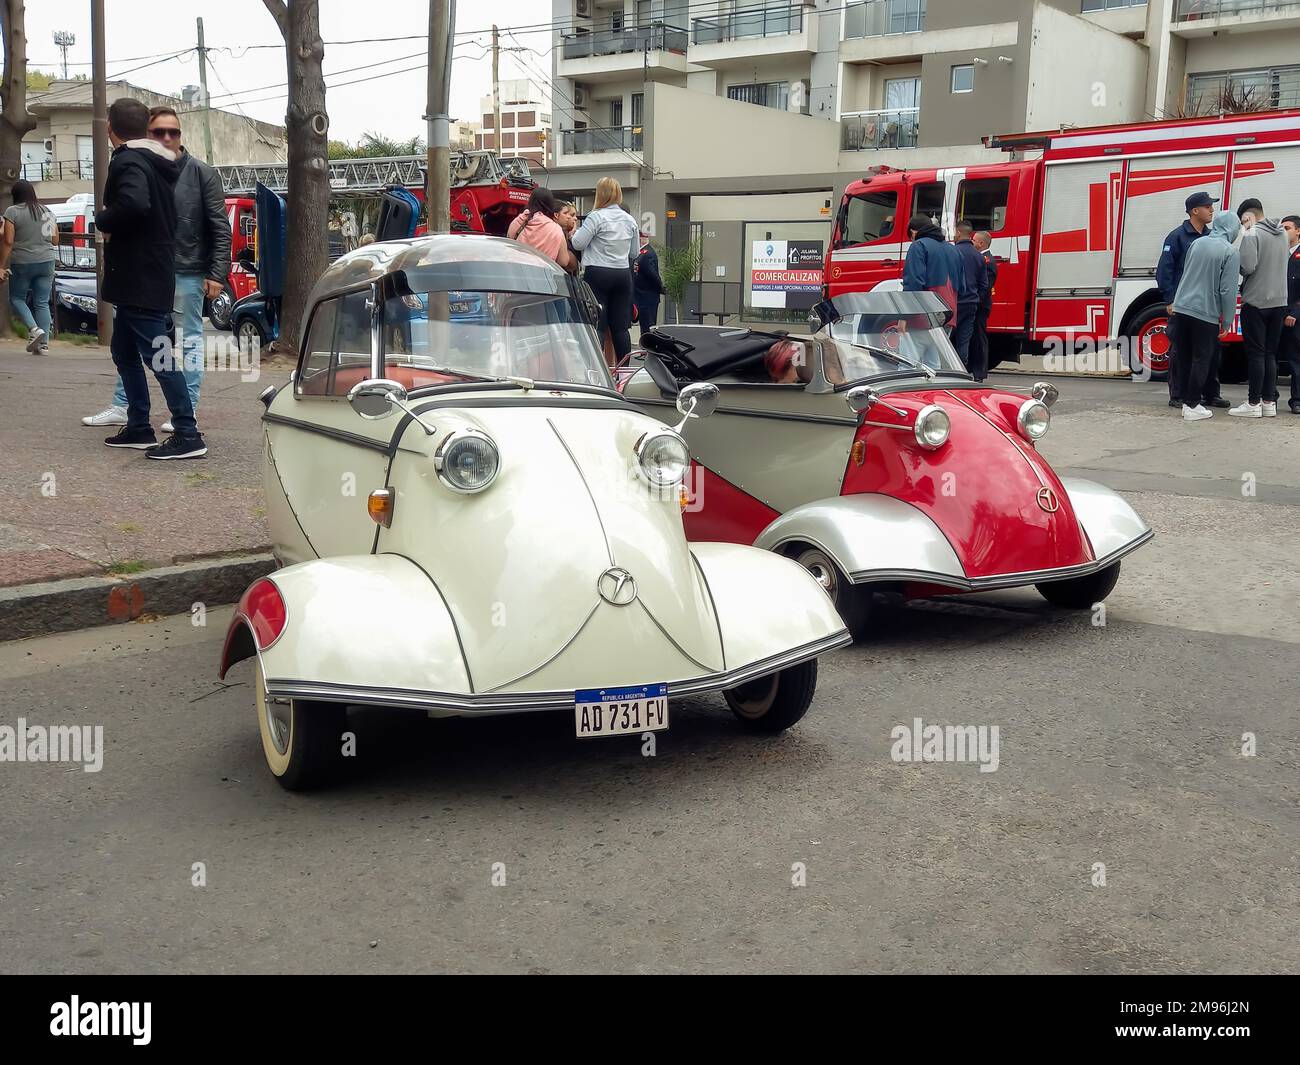 Old classic economy 1950s Messerschmitt KR200 Kabinenroller coupe and KR201 roadster one door three wheel German micro cars parked in the street. Stock Photo